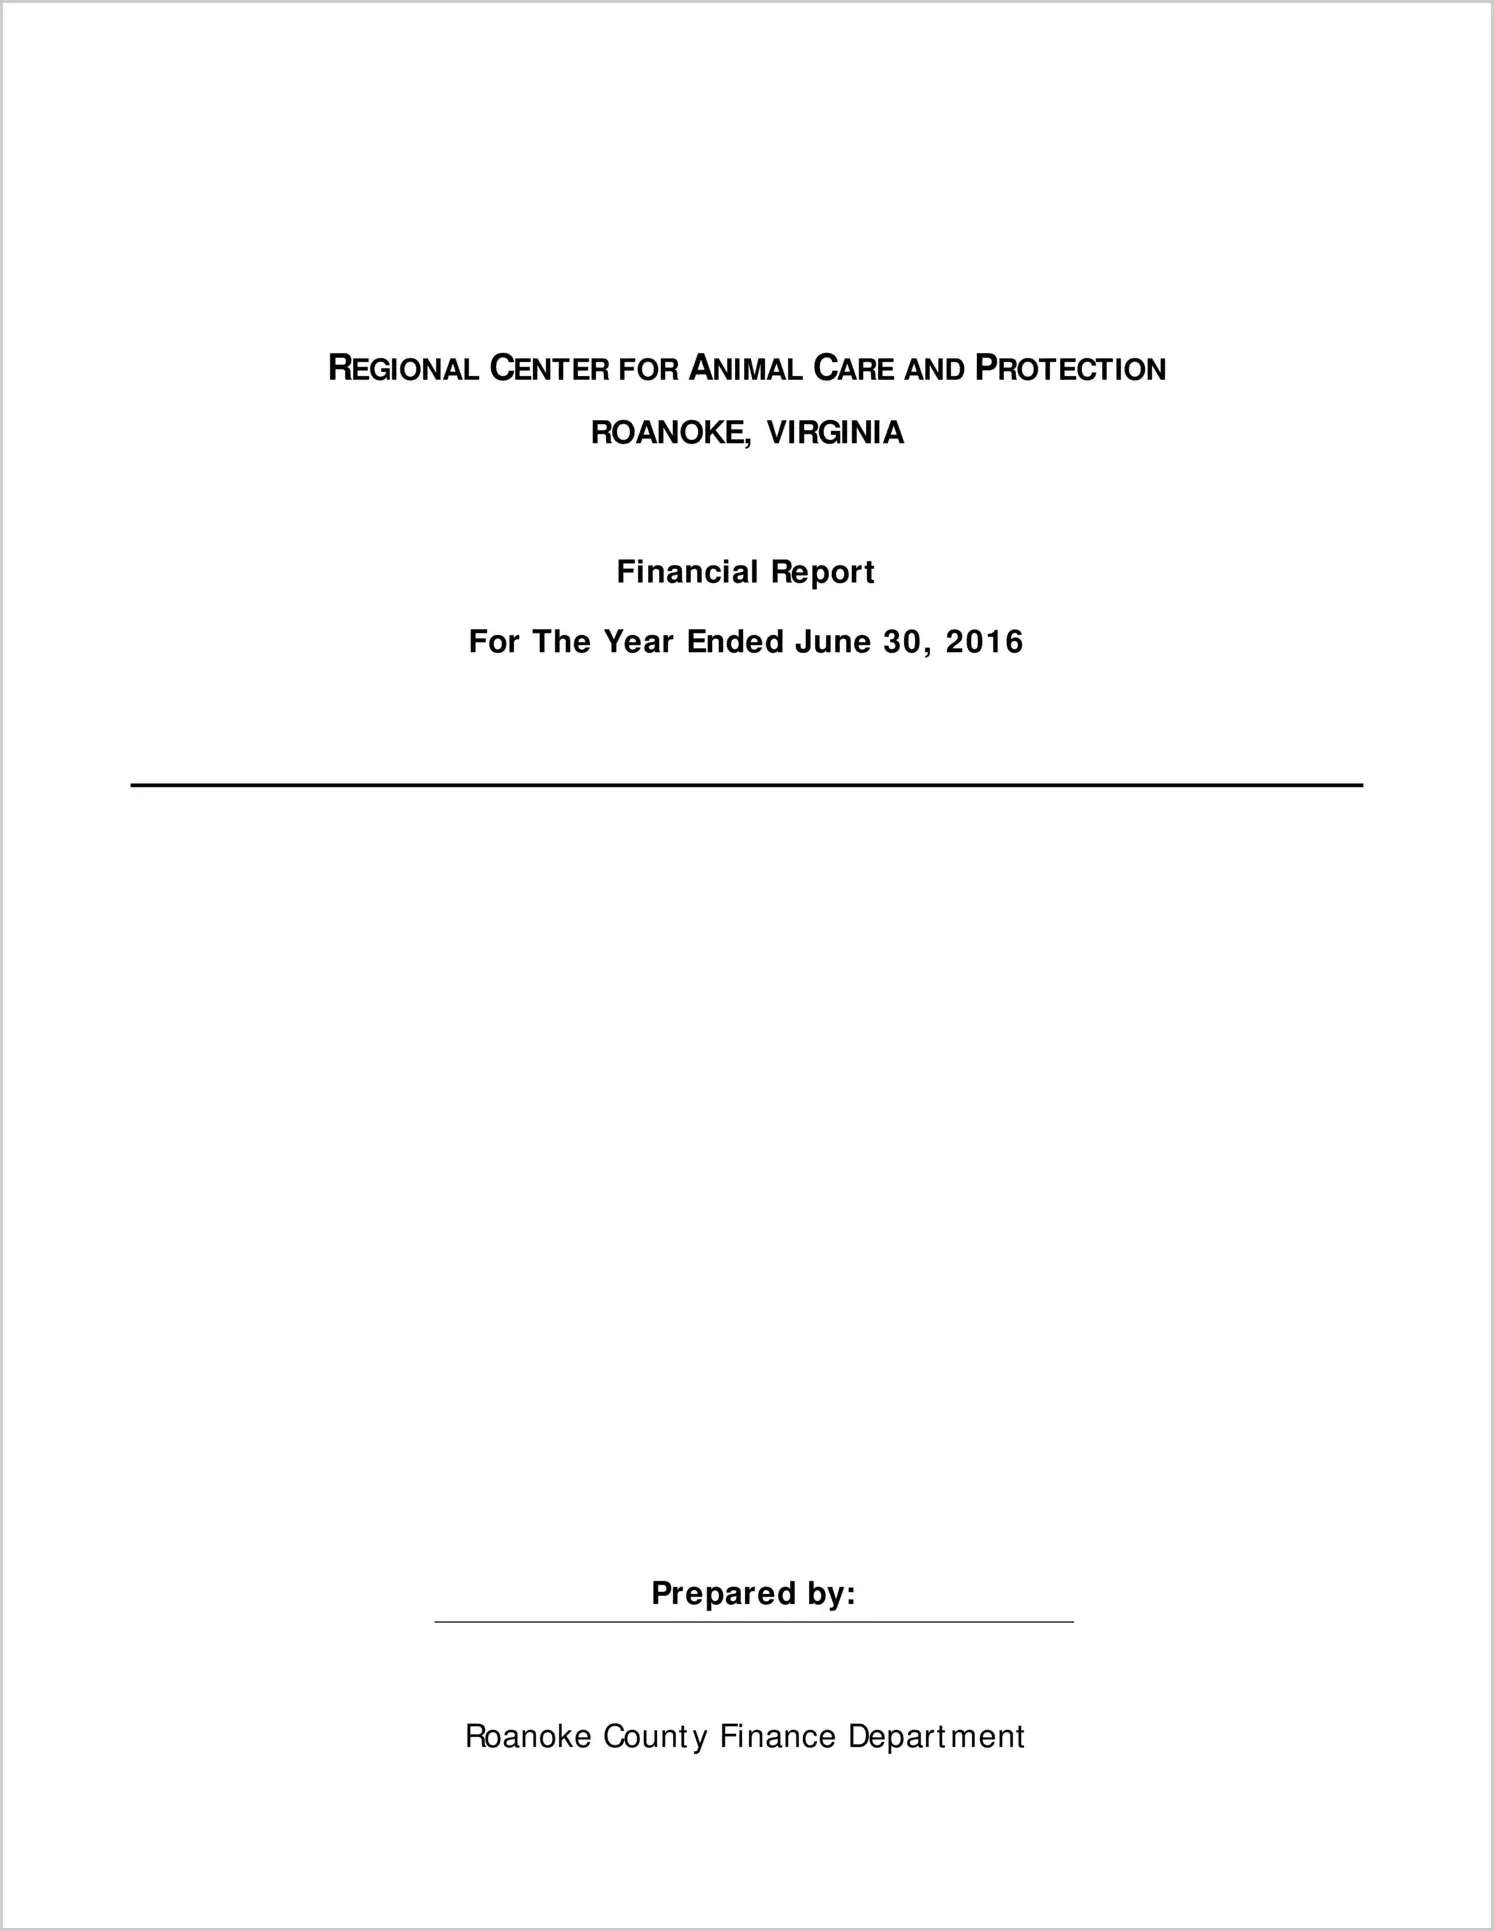 2016 Other Annual Financial Report for Regional Center for Animal Care and Protection